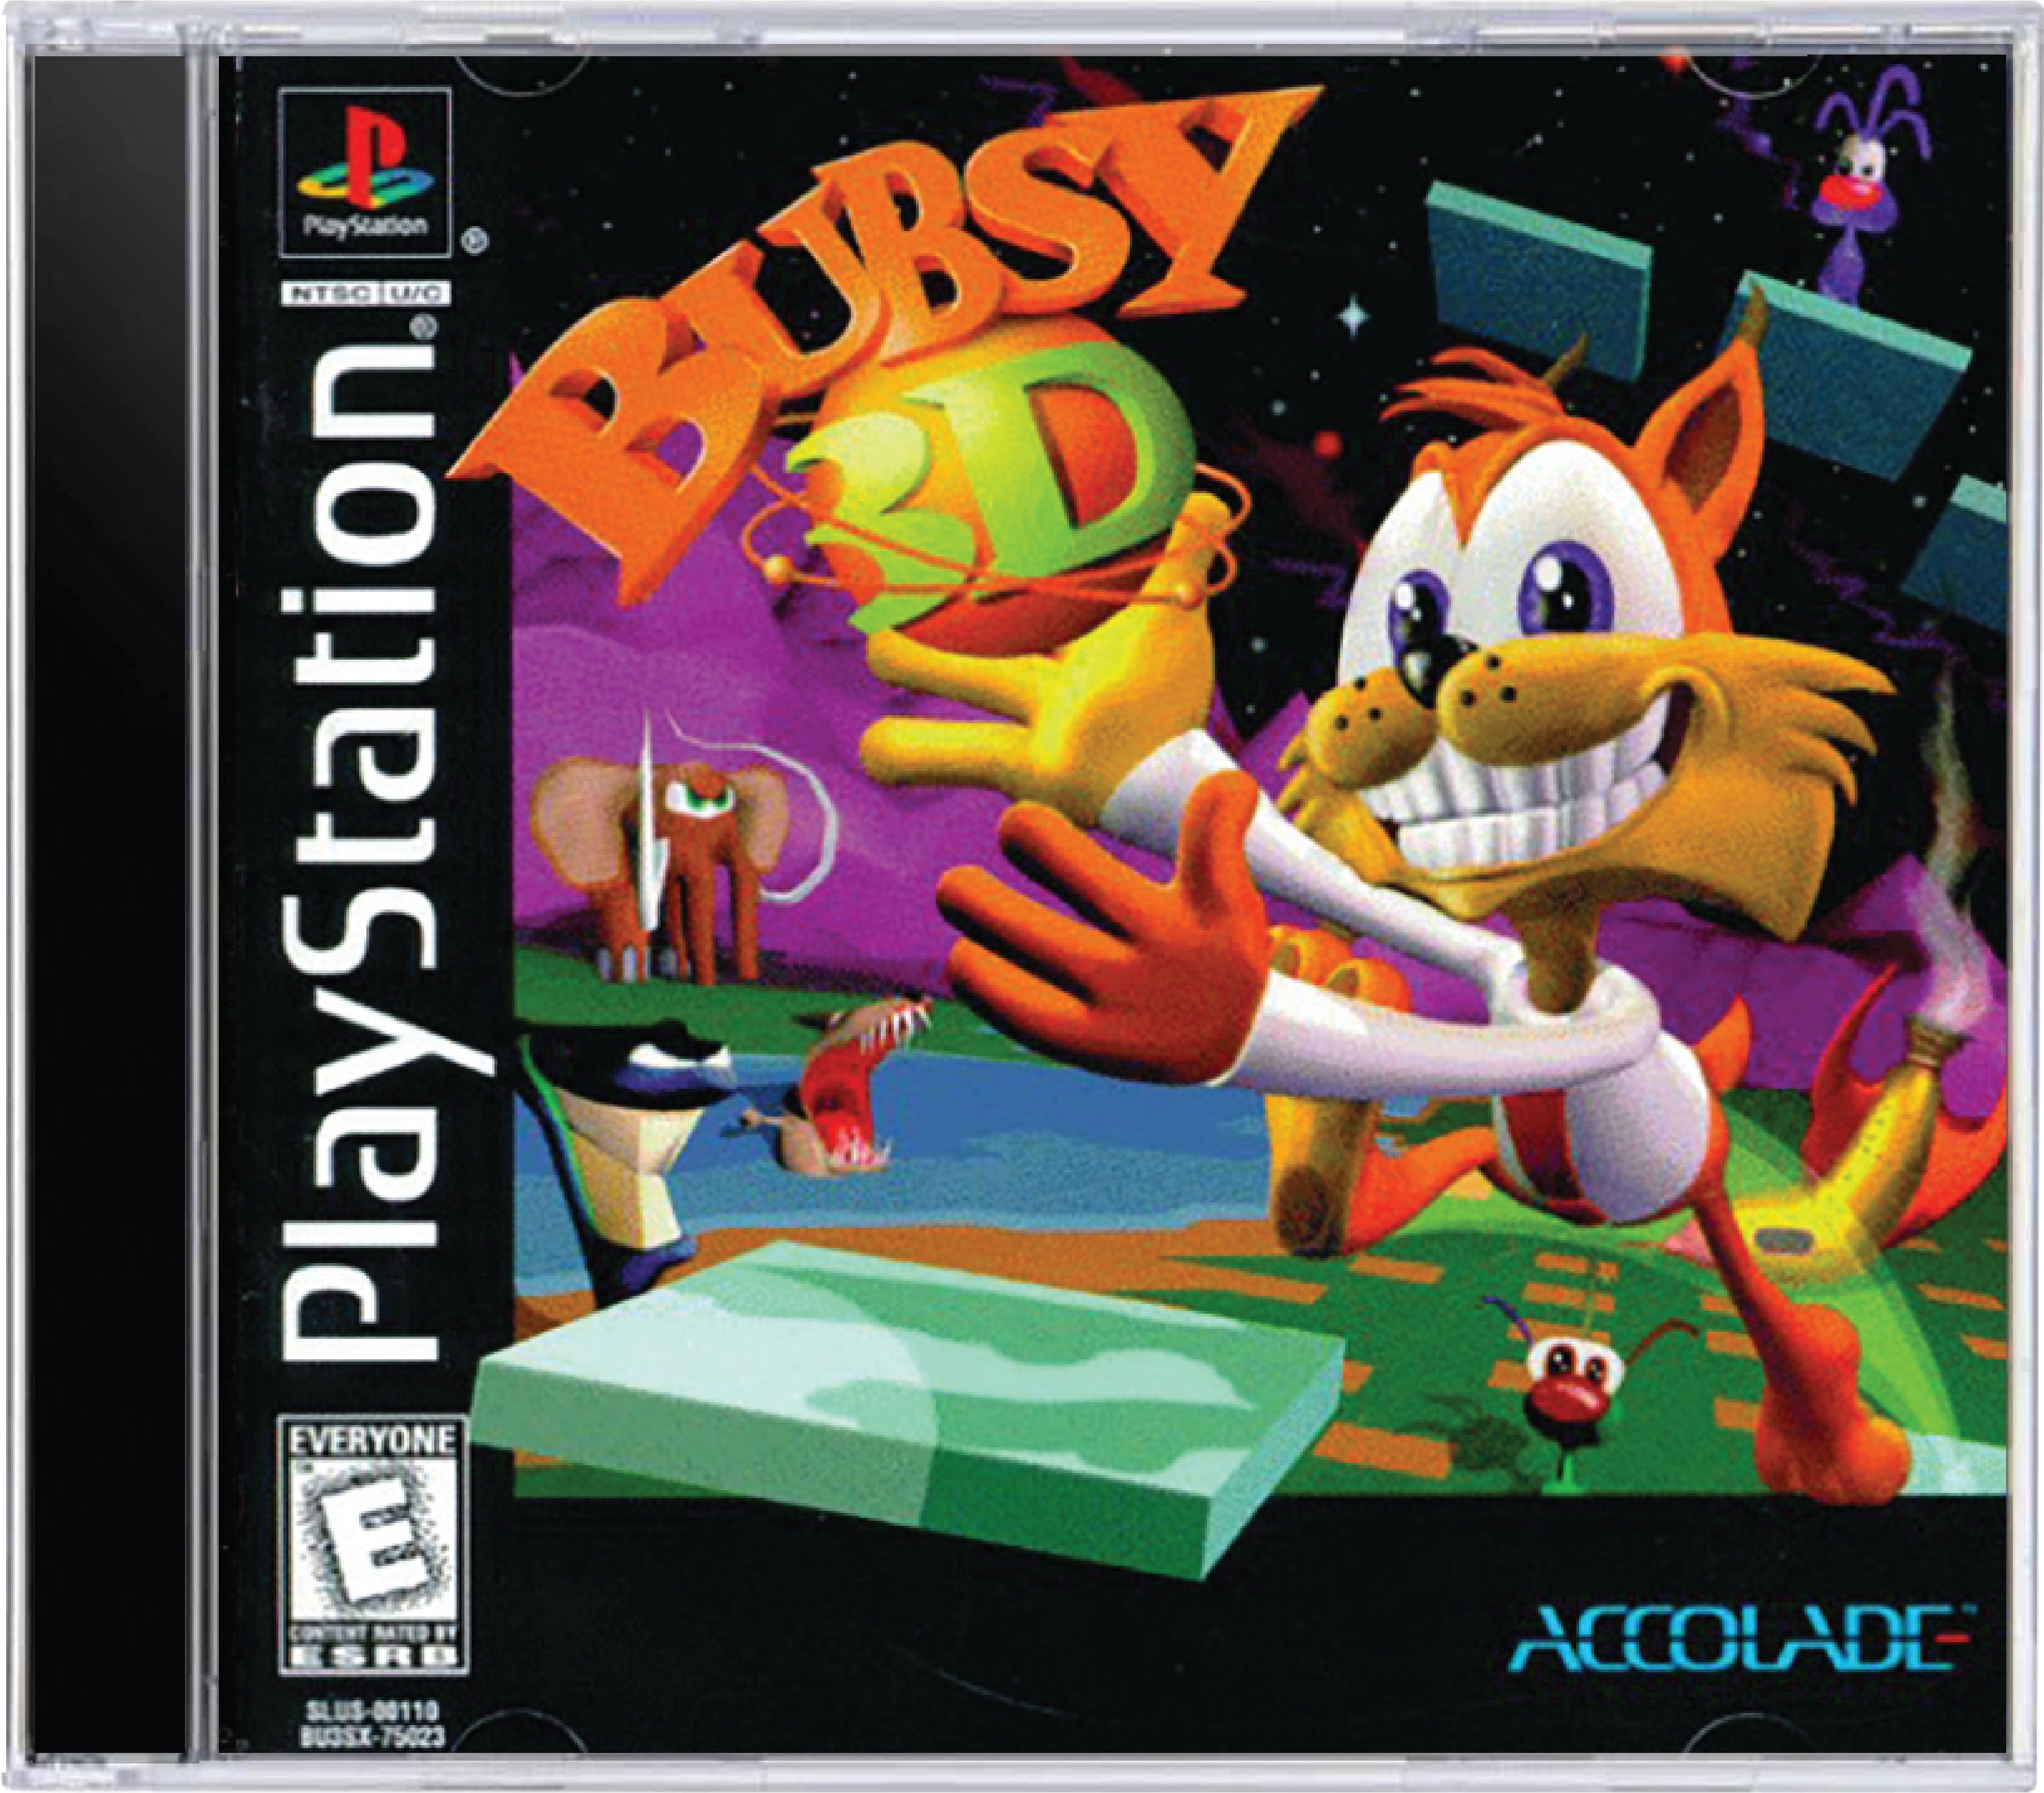 Bubsy 3D Cover Art and Product Photo